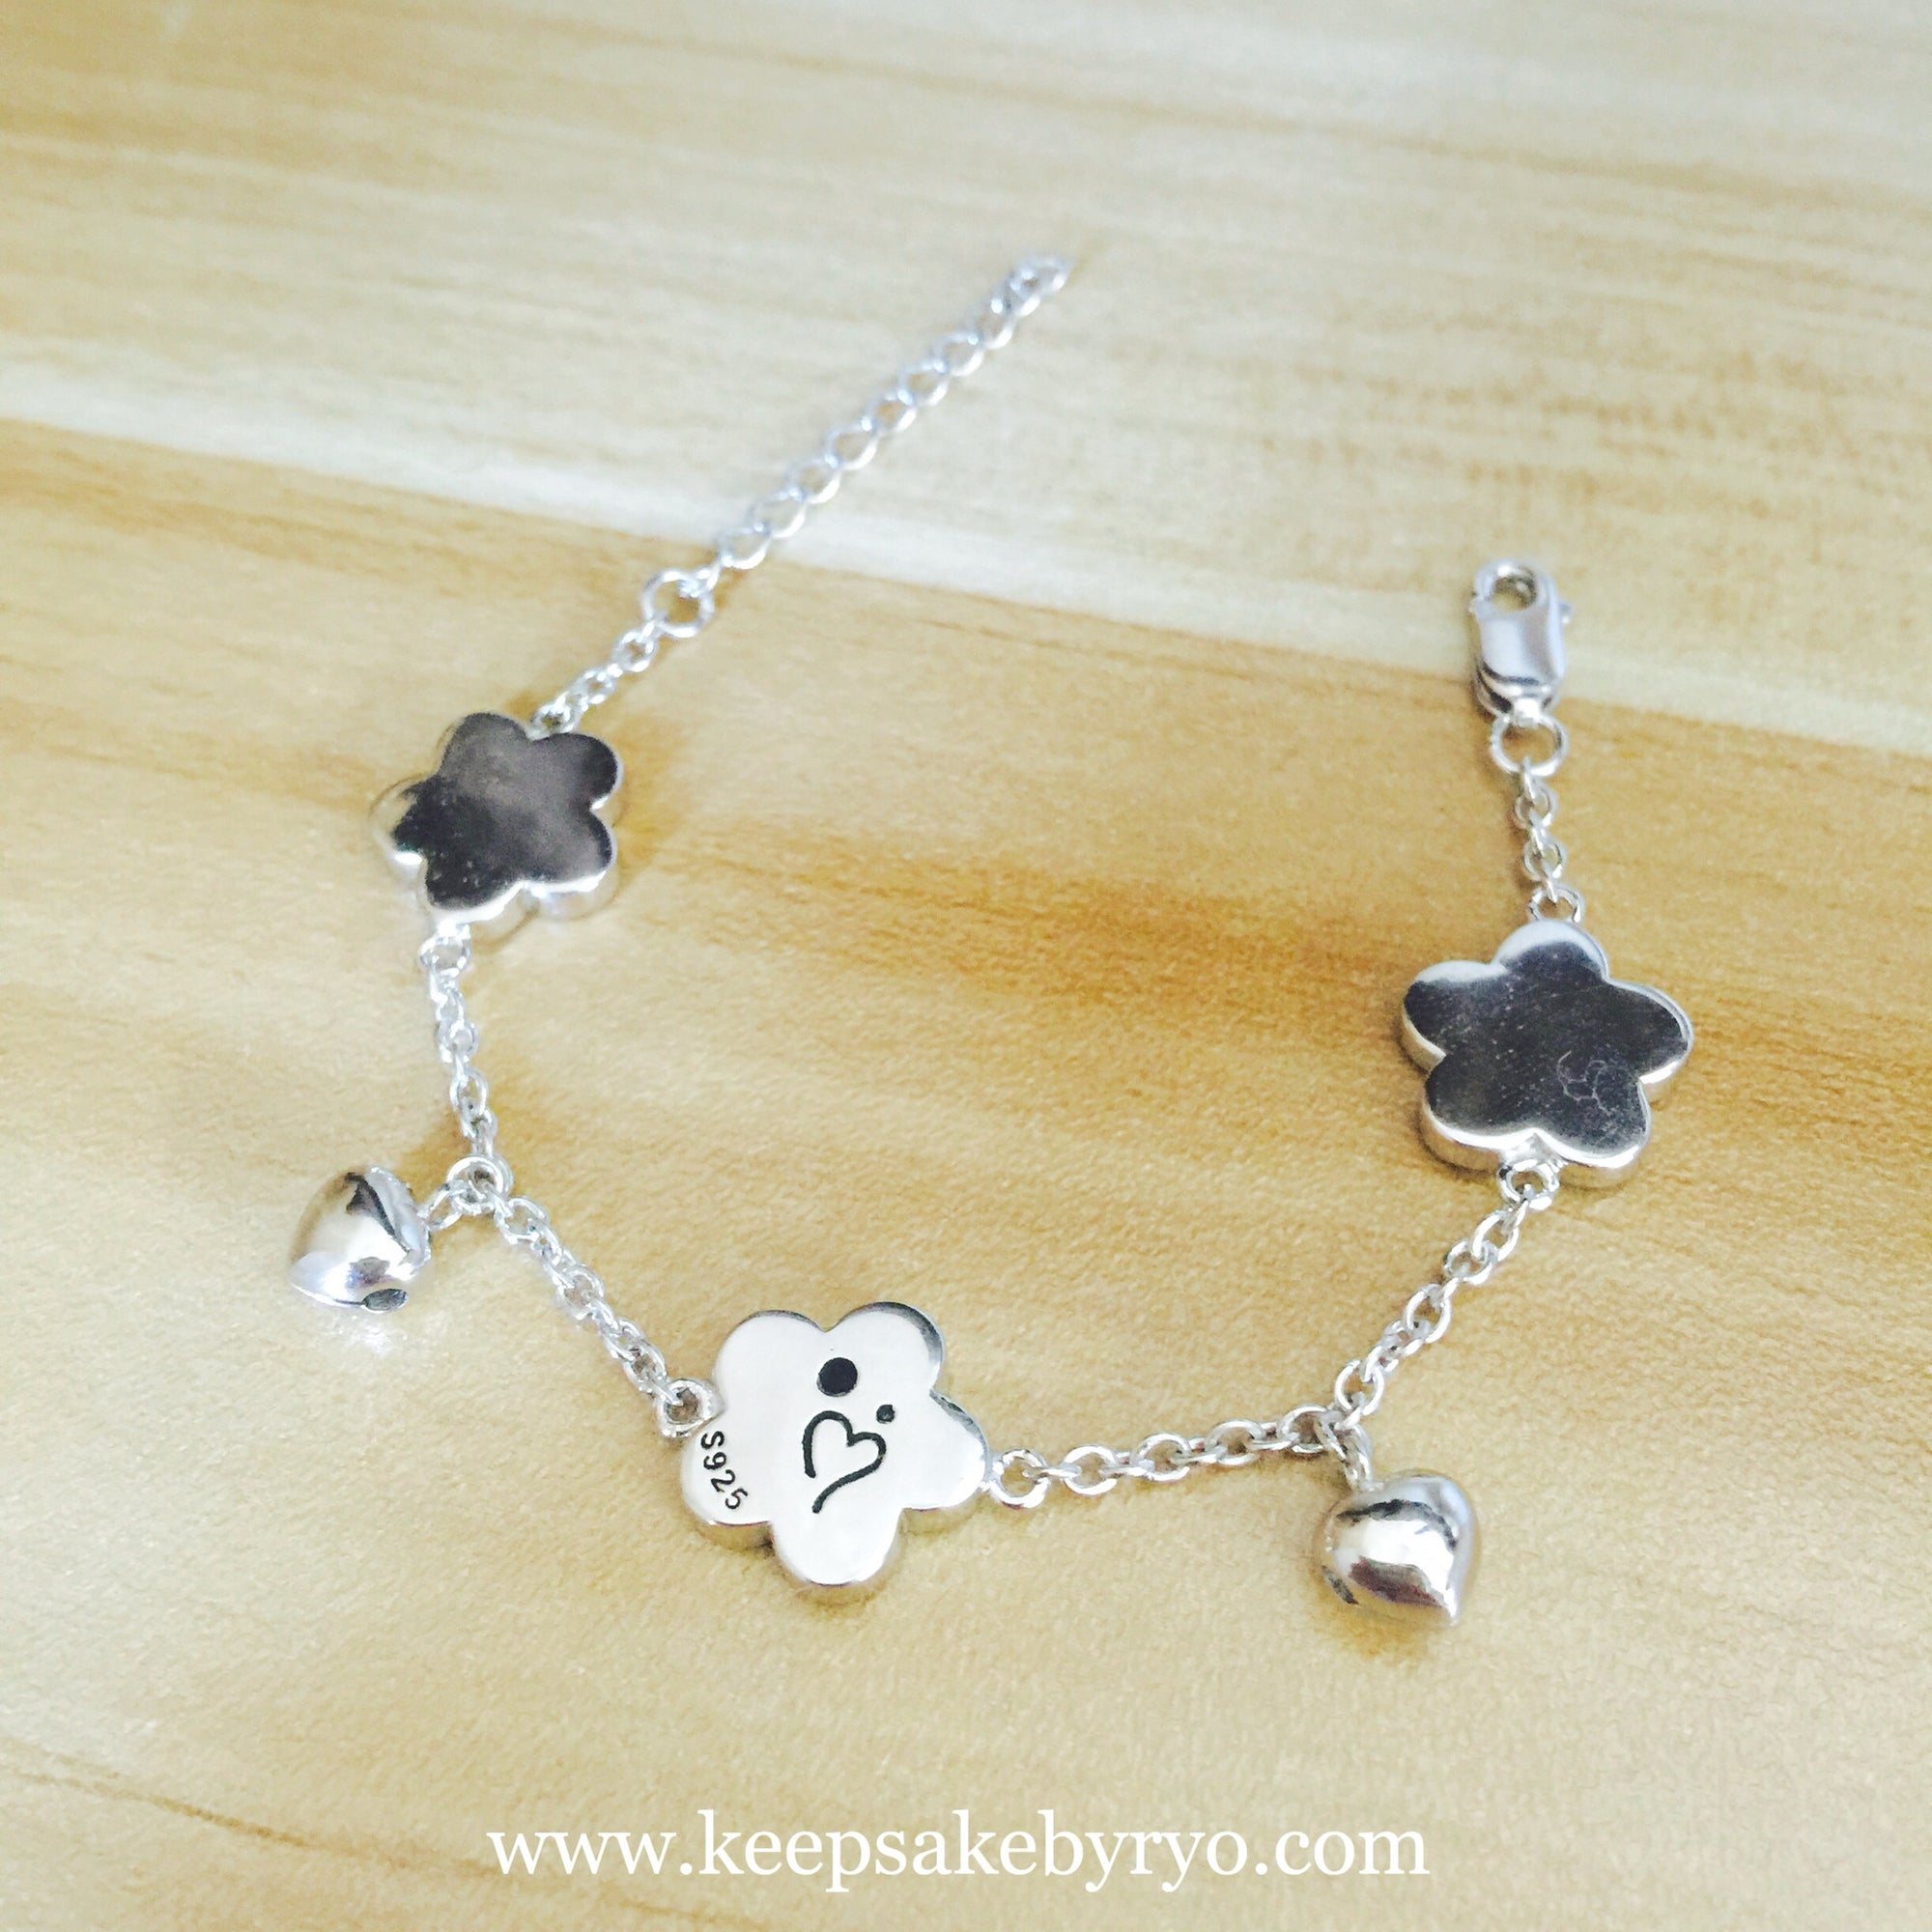 FIVE LEAF CLOVER BABY ANKLET WITH HEART SHAPED BELLS